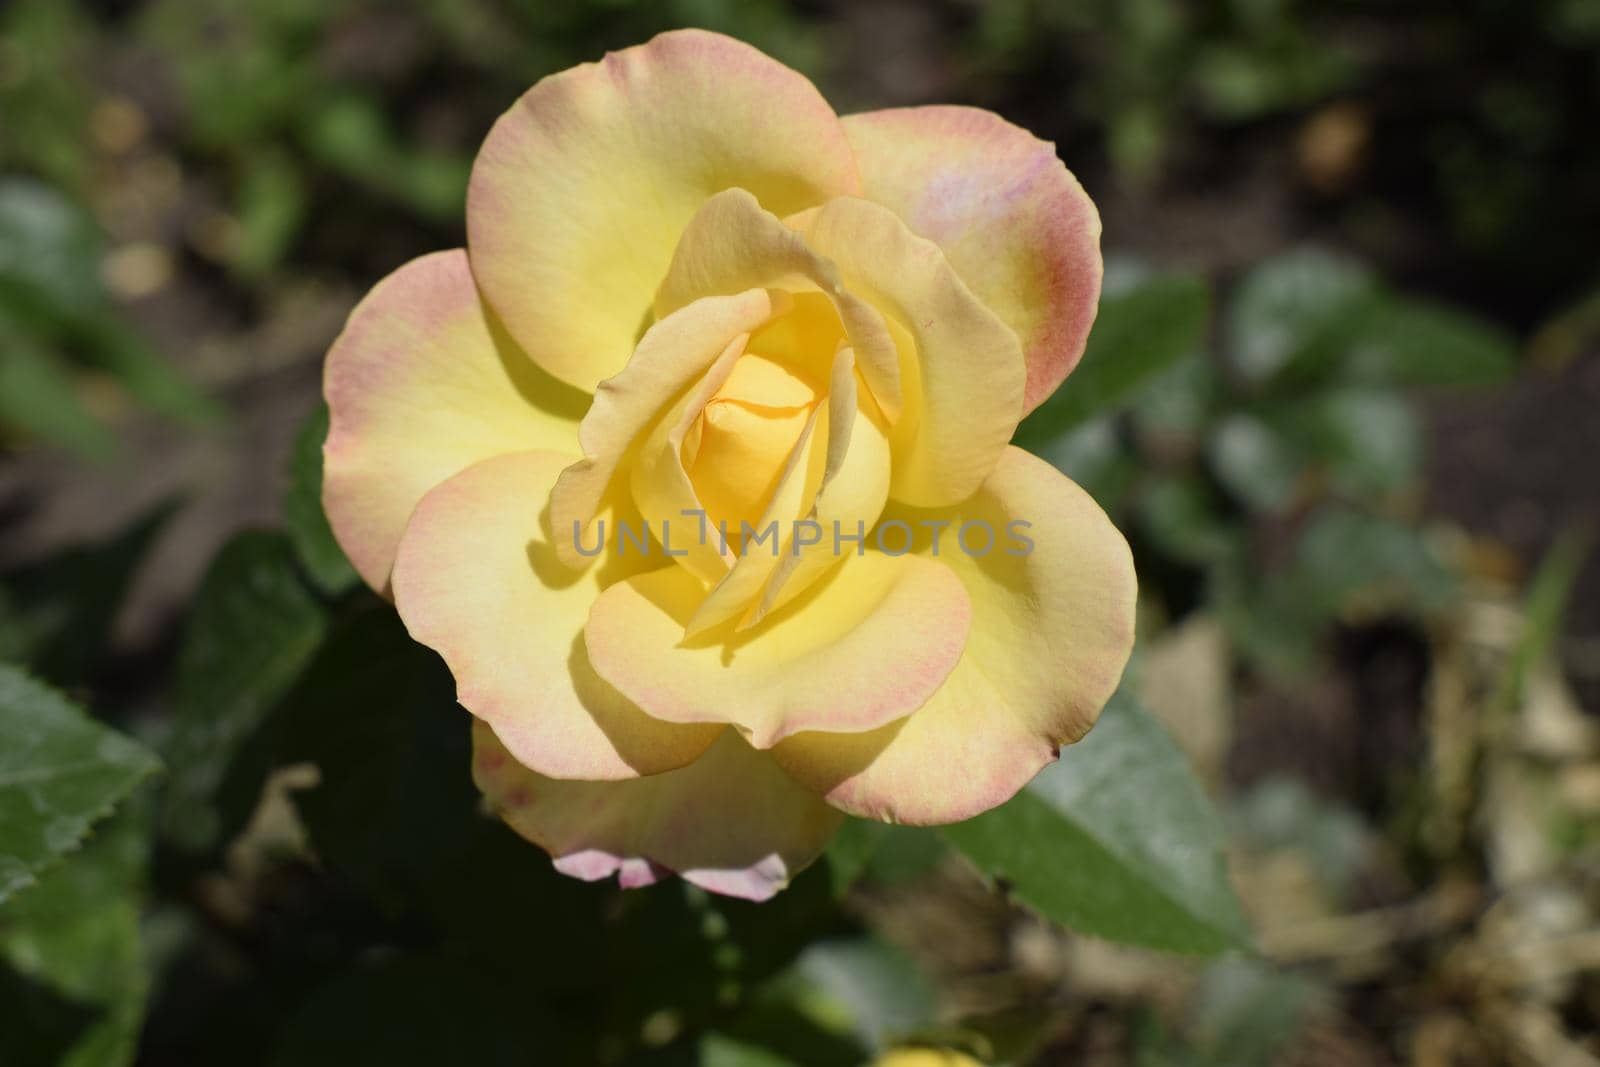 A Plant with colour changing roses. Multicolour roses with amazing combination og red, yellow ,orange and pink looks like bright light in it. Natural beauty and glow on green garden outdoor